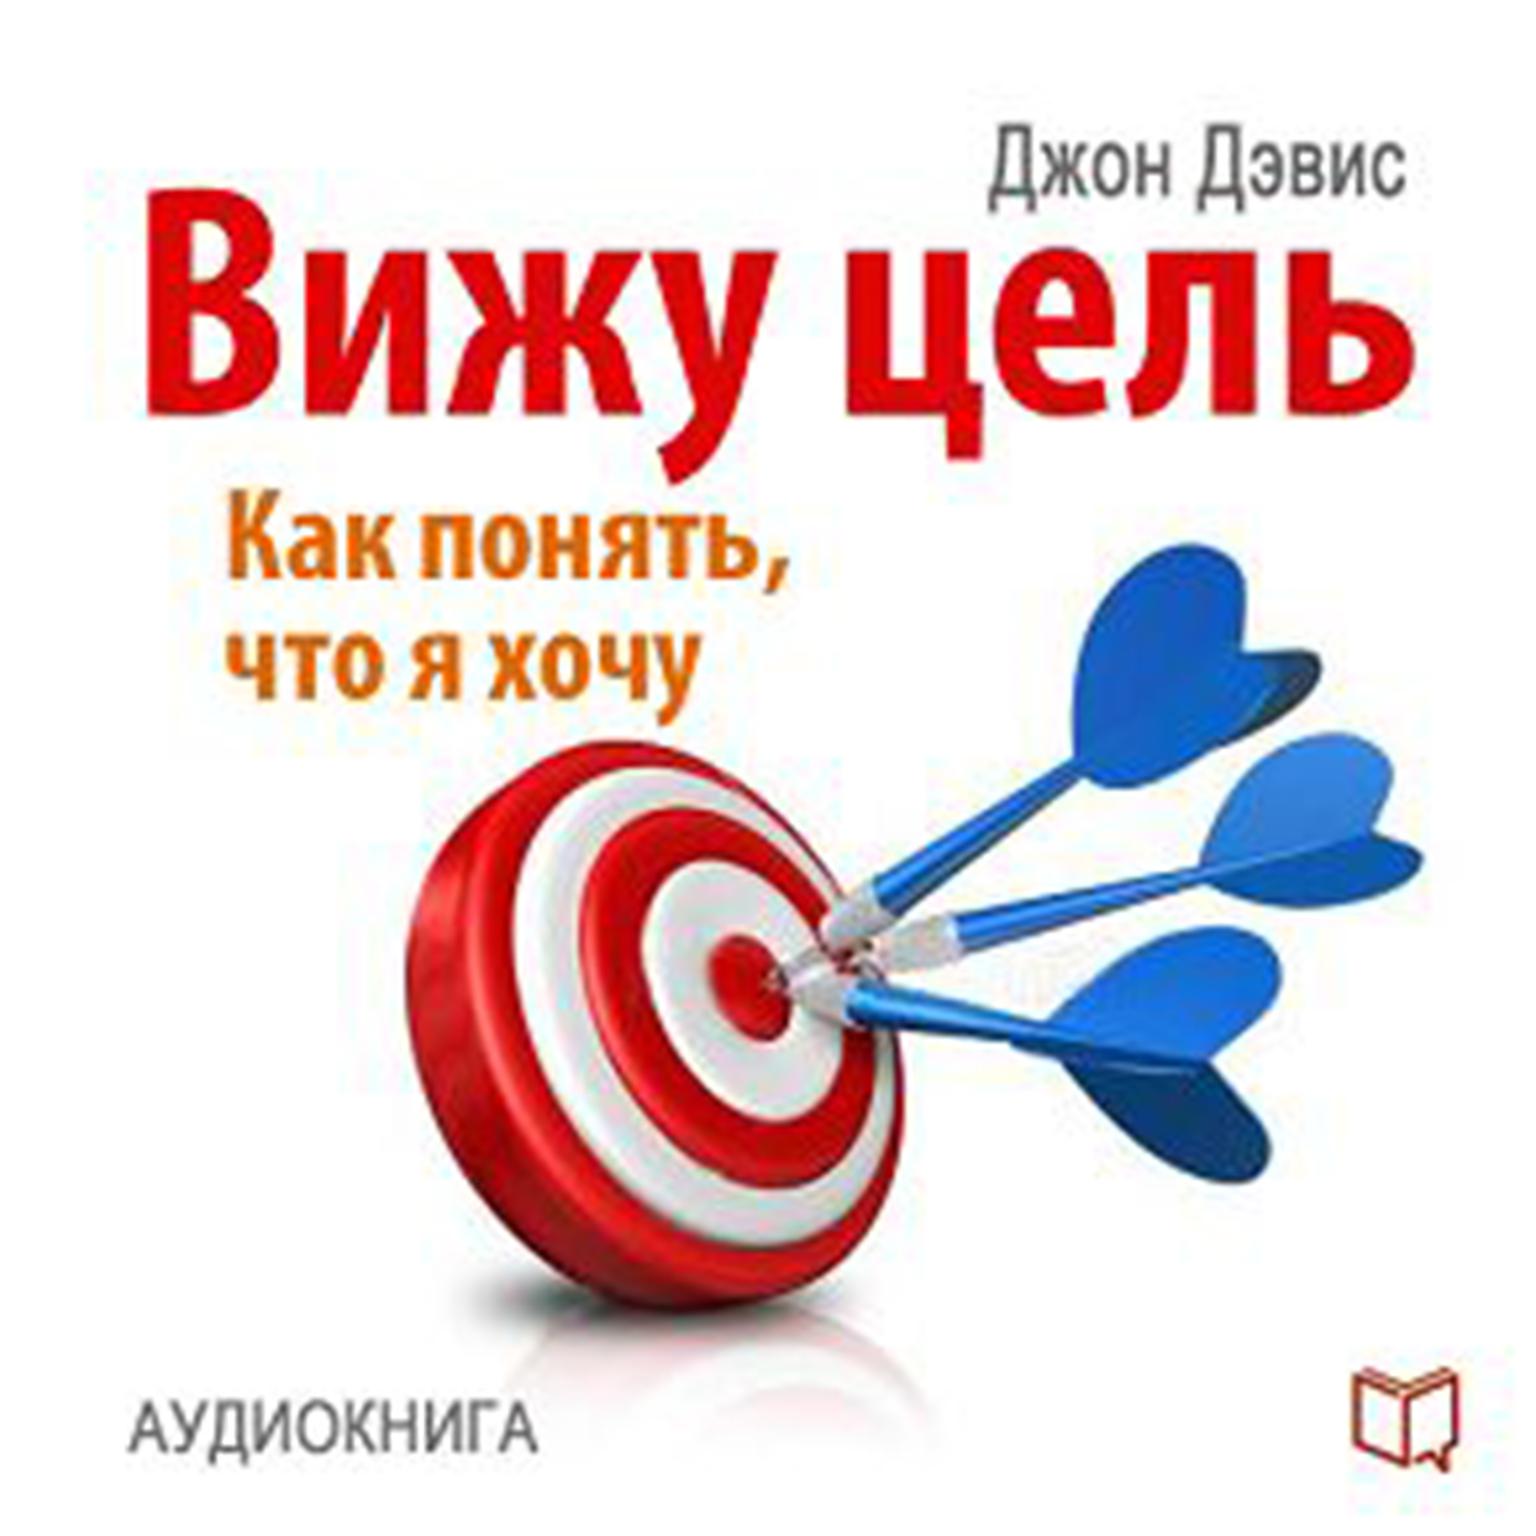 I See the Goal: How to Understand What I Want, and to Achieve This [Russian Edition] Audiobook, by John Davis